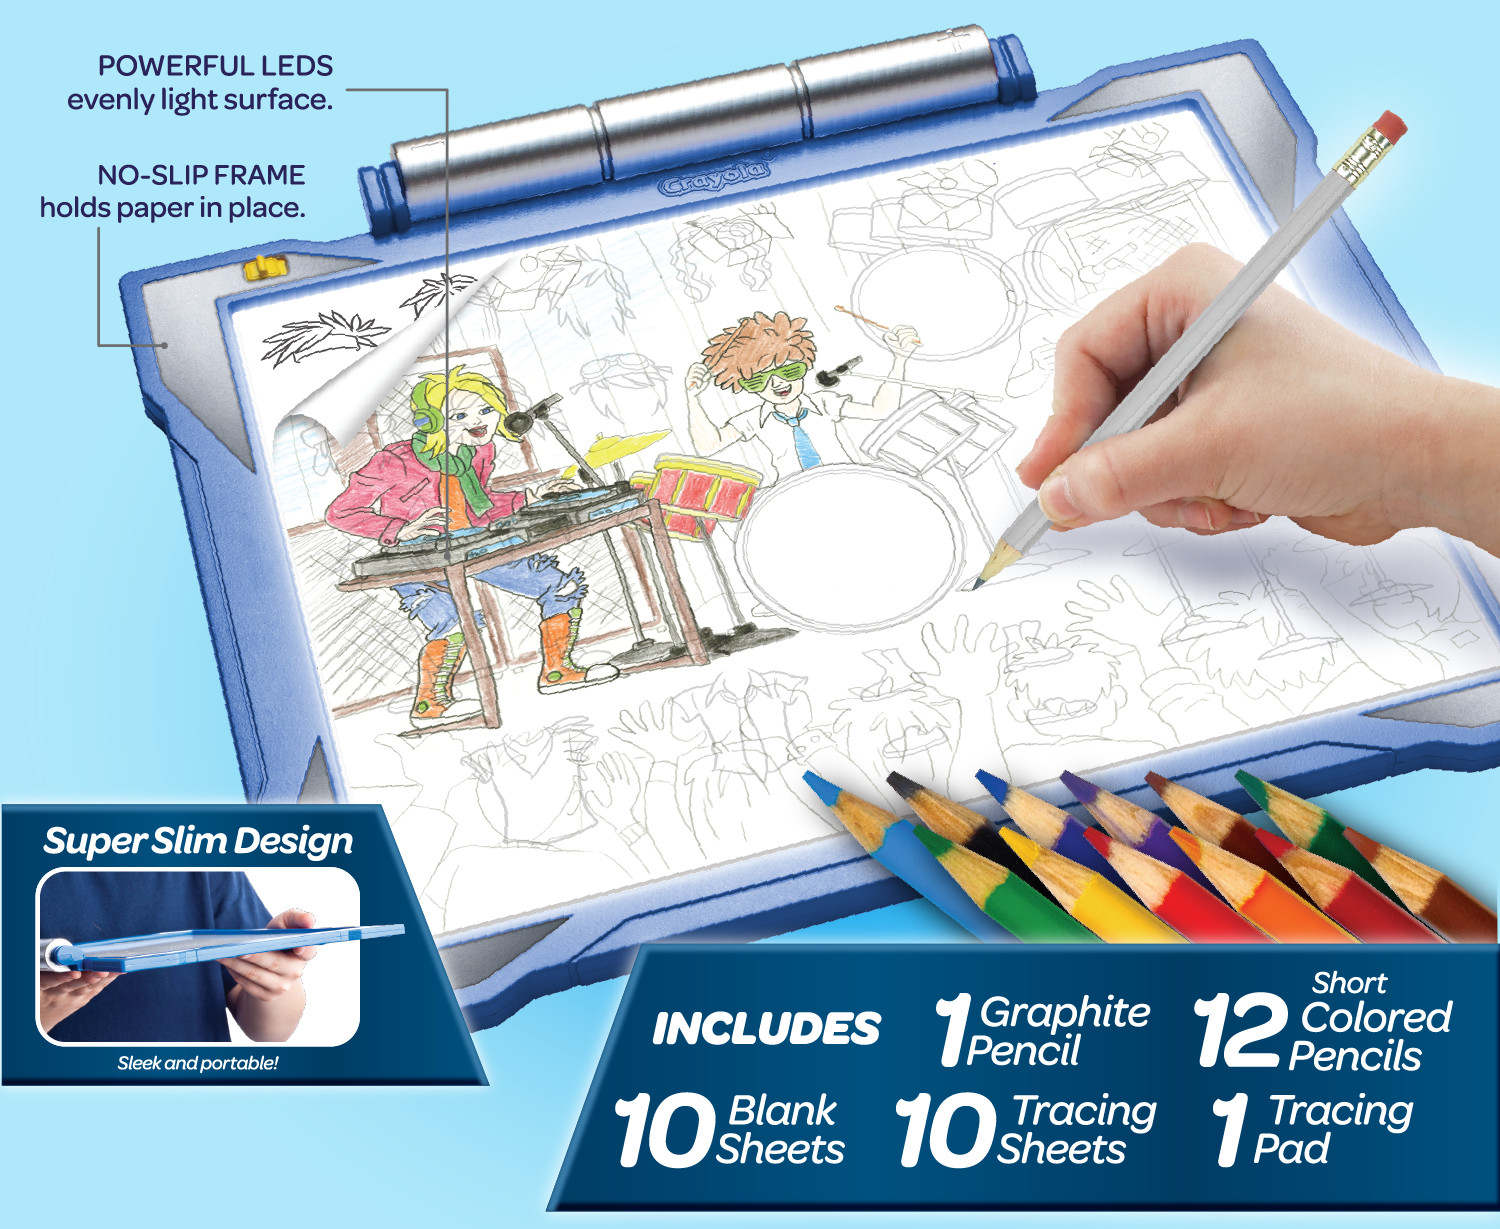 Crayola Light-Up Tracing Pad, Blue, School Supplies, Art Set, Gifts for Girls & Boys, Beginner Child - image 4 of 9